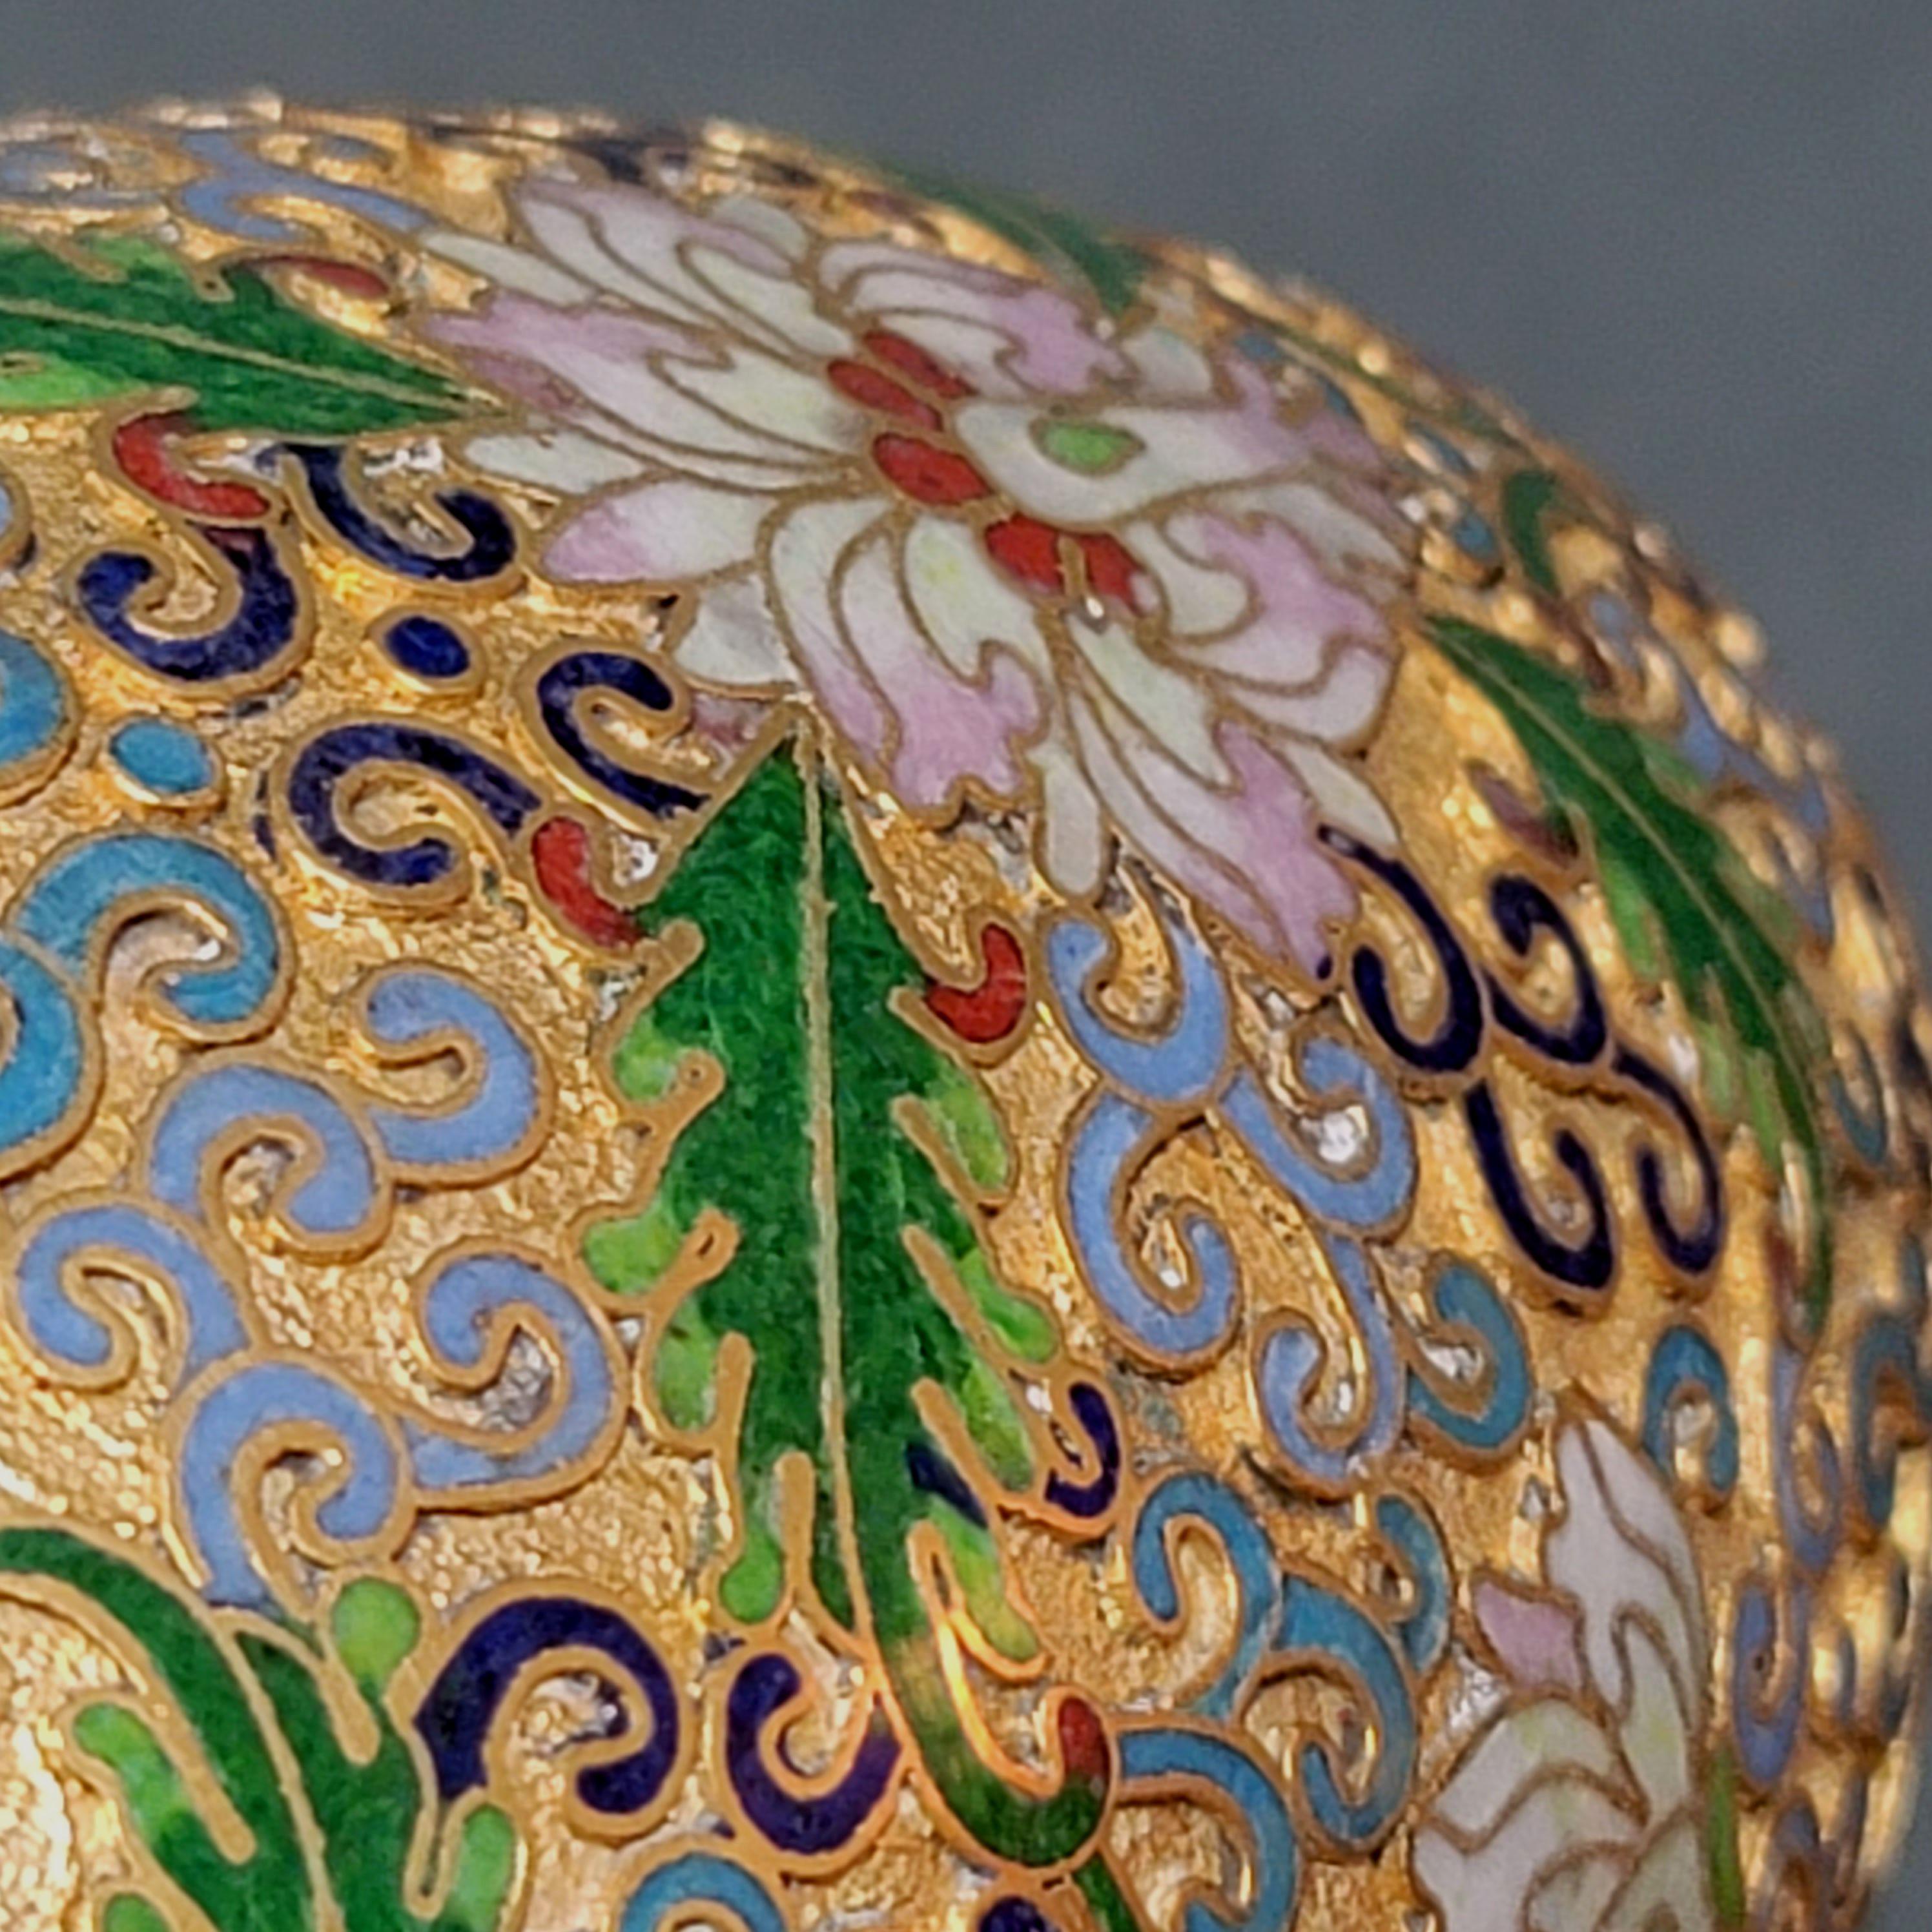 20th Century Chinese Cloisonné Enamel Egg with Wood Stand, Early 20 Century